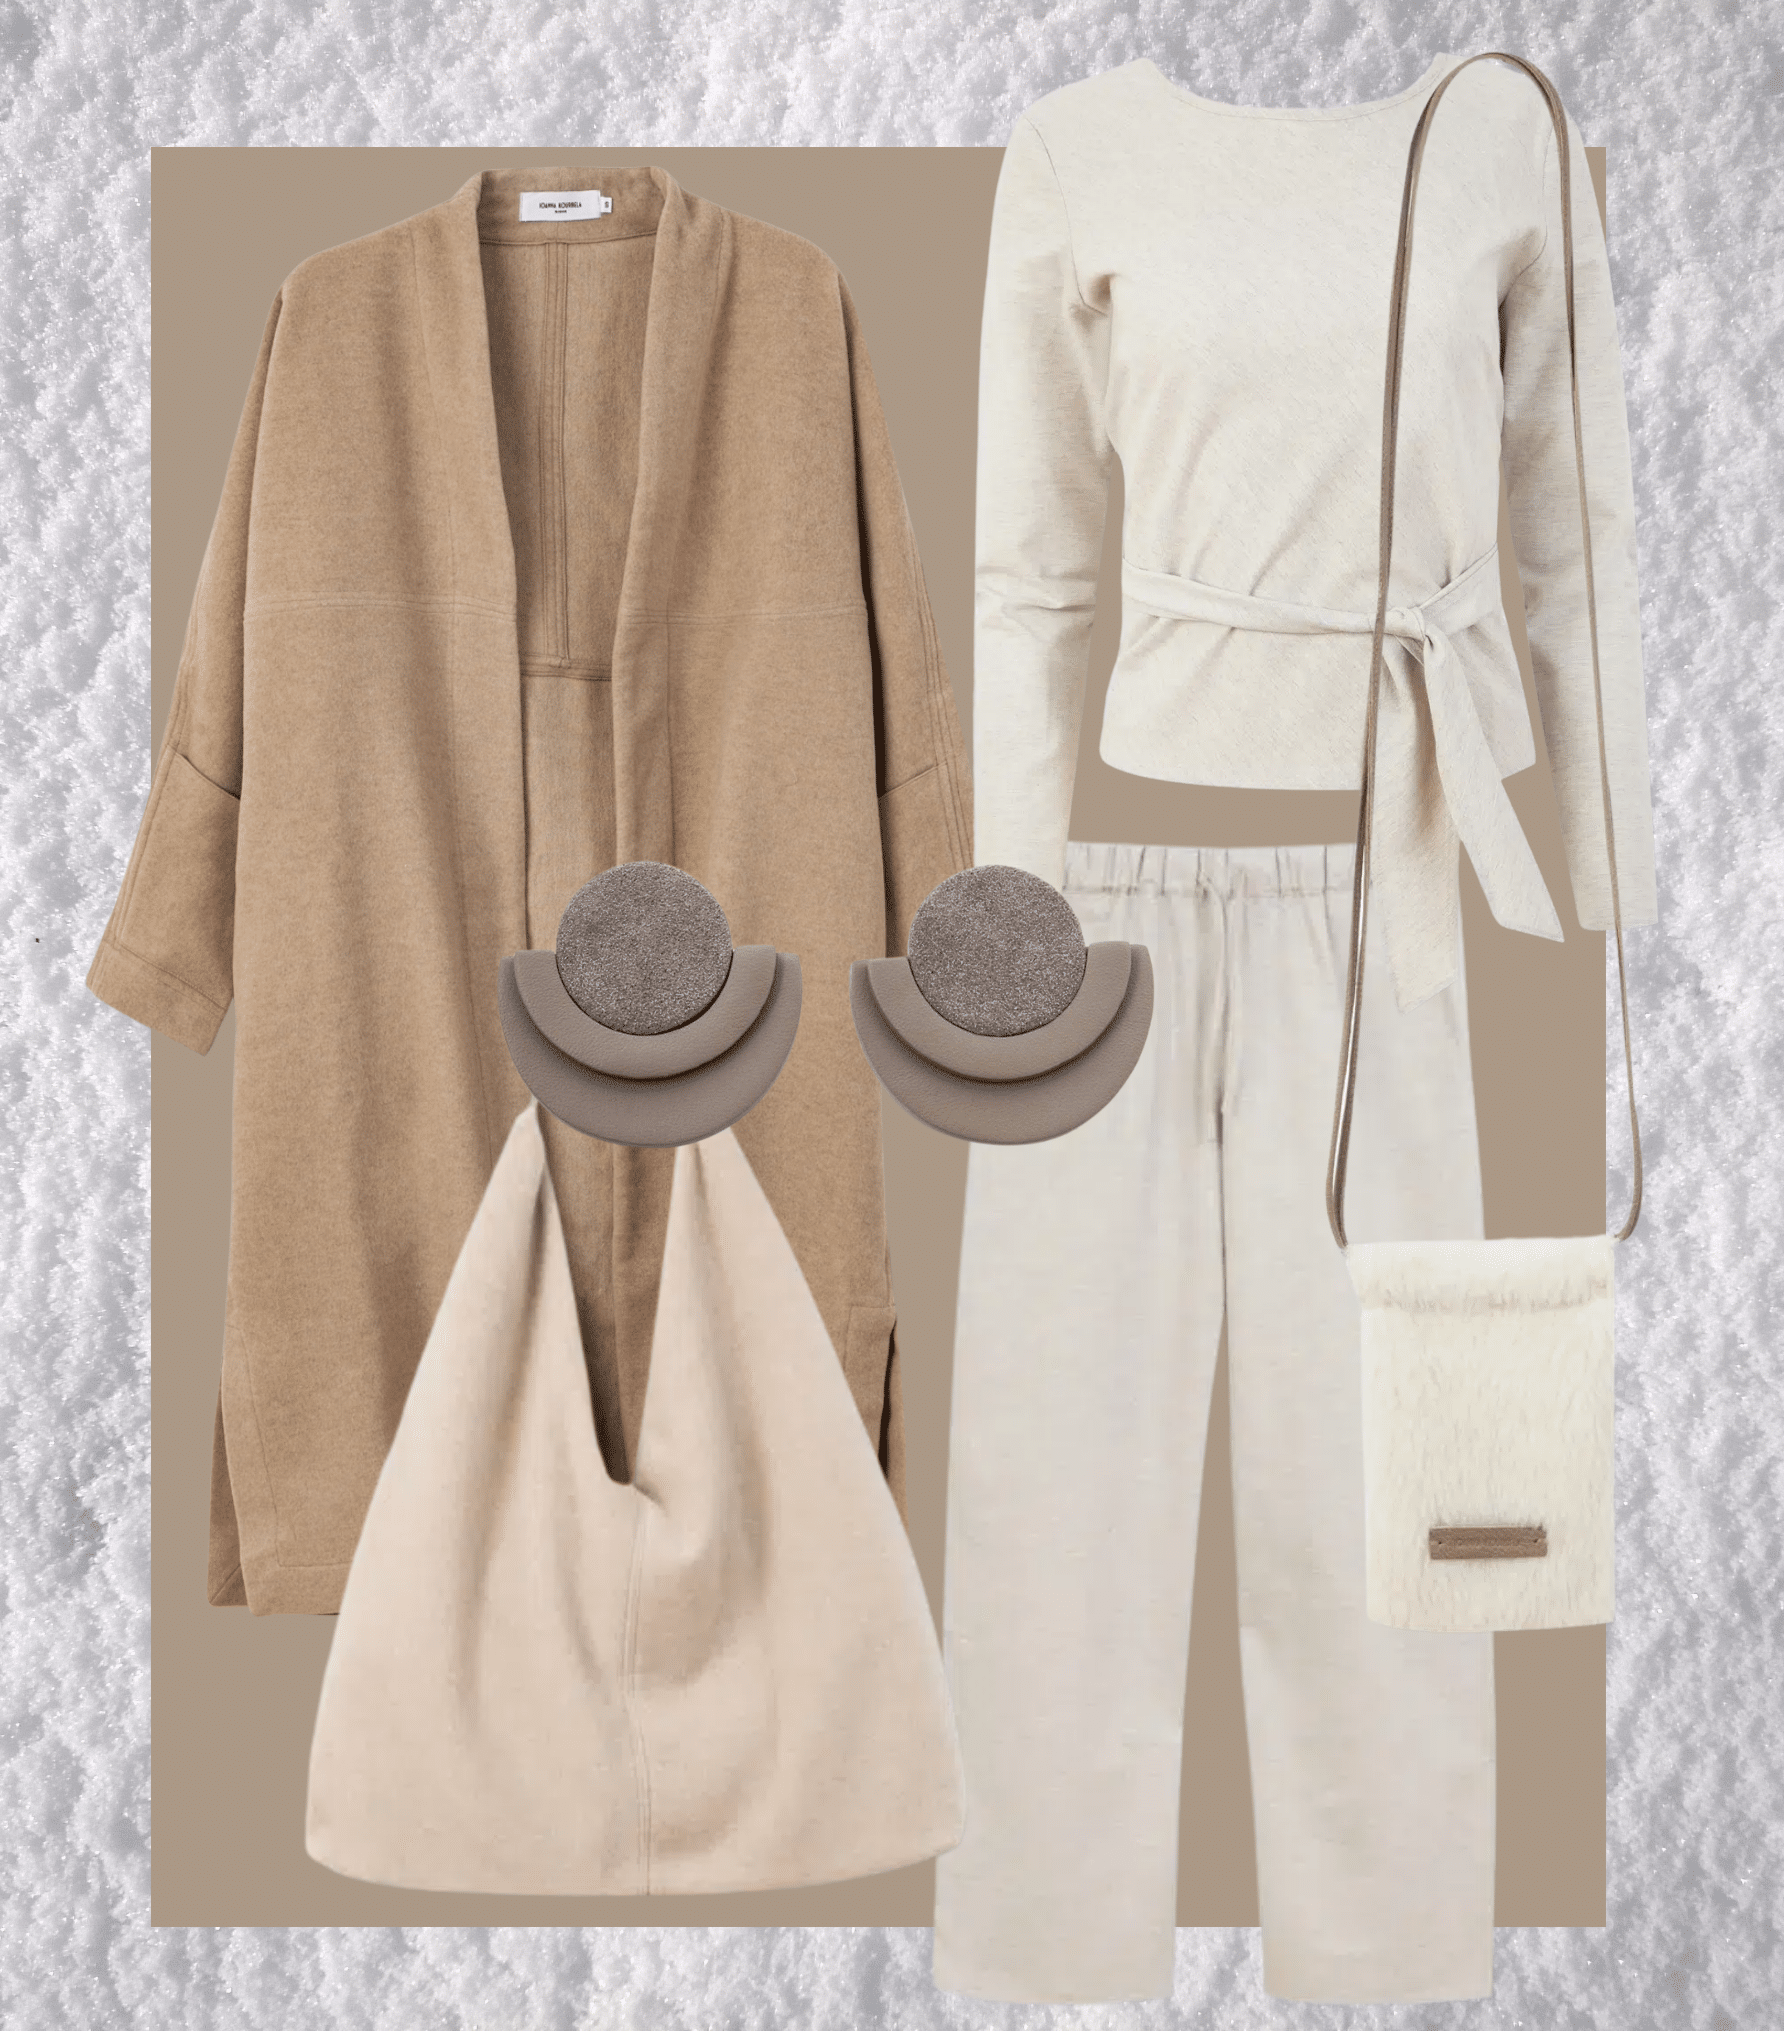 Classy and Chic in Neutrals